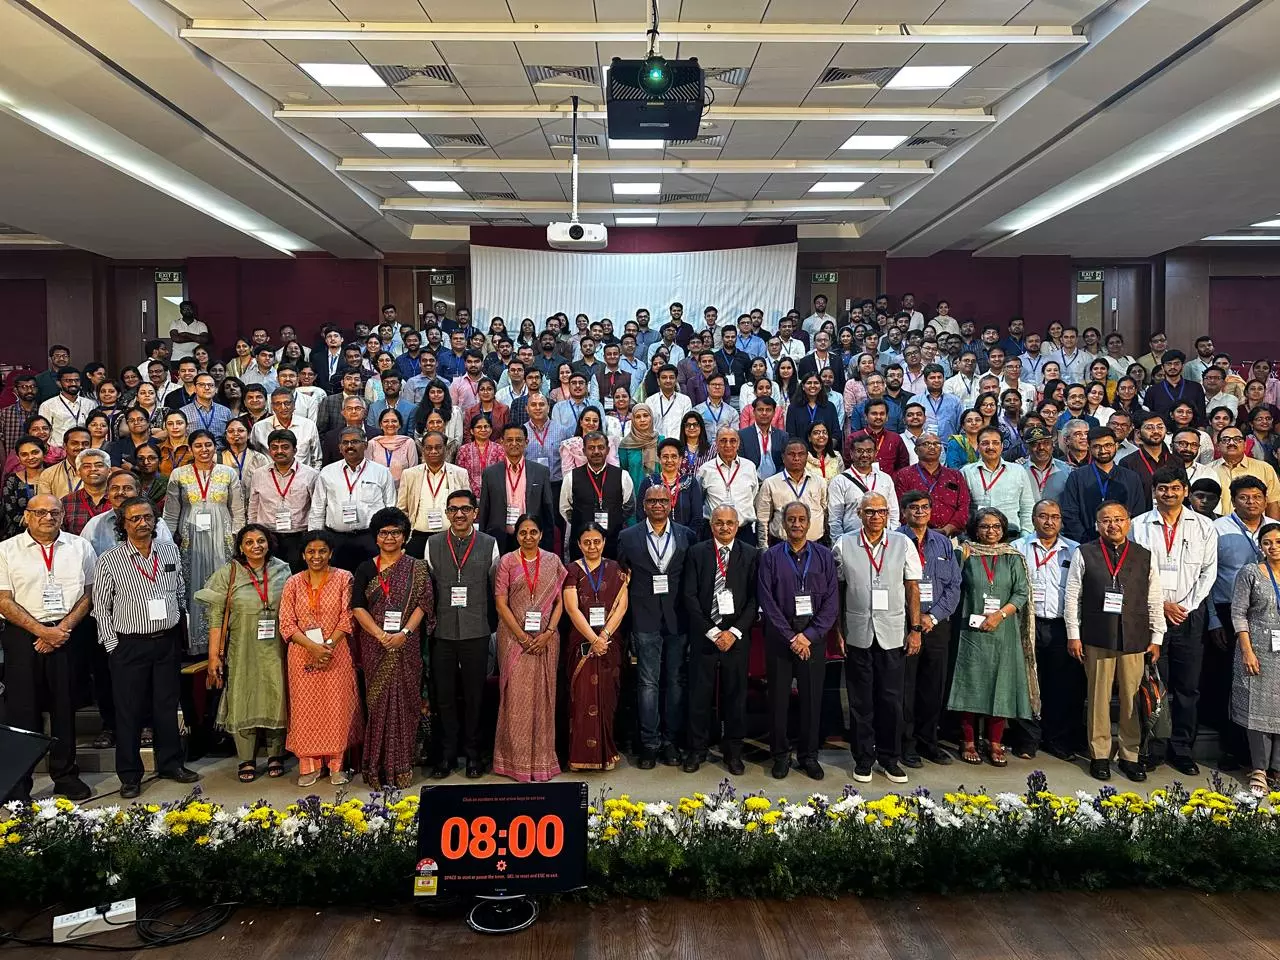 400 Doctors From Across India Attend Clinical Rheumatology Conference in Hyderabad